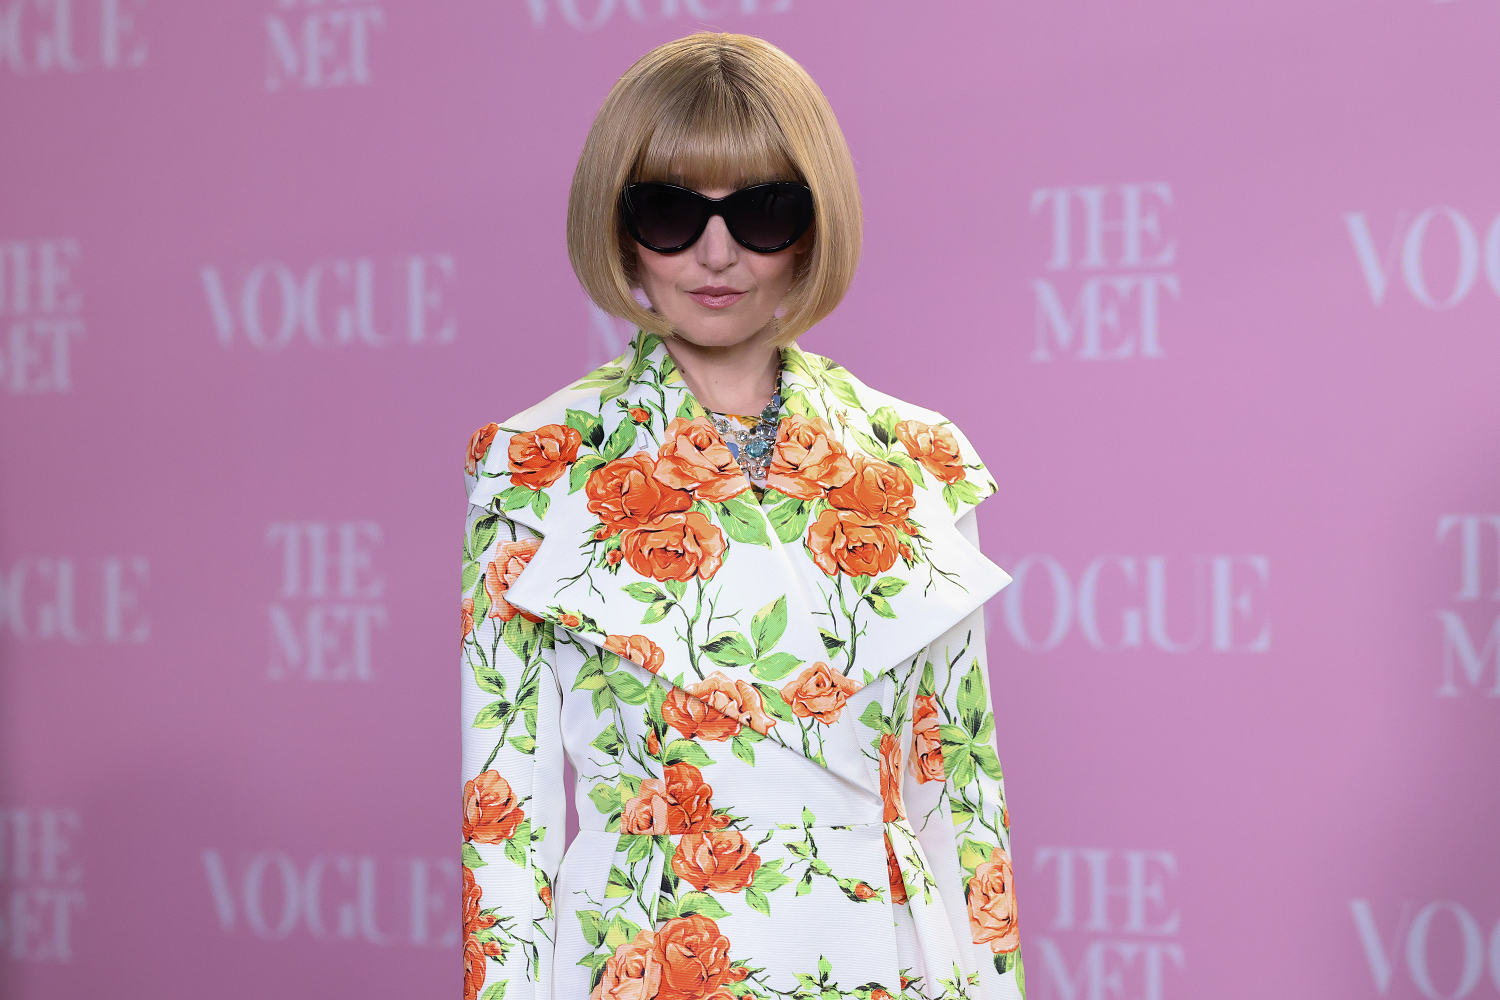 chloe fineman’s impression of anna wintour on 'snl' is so good it fooled fans